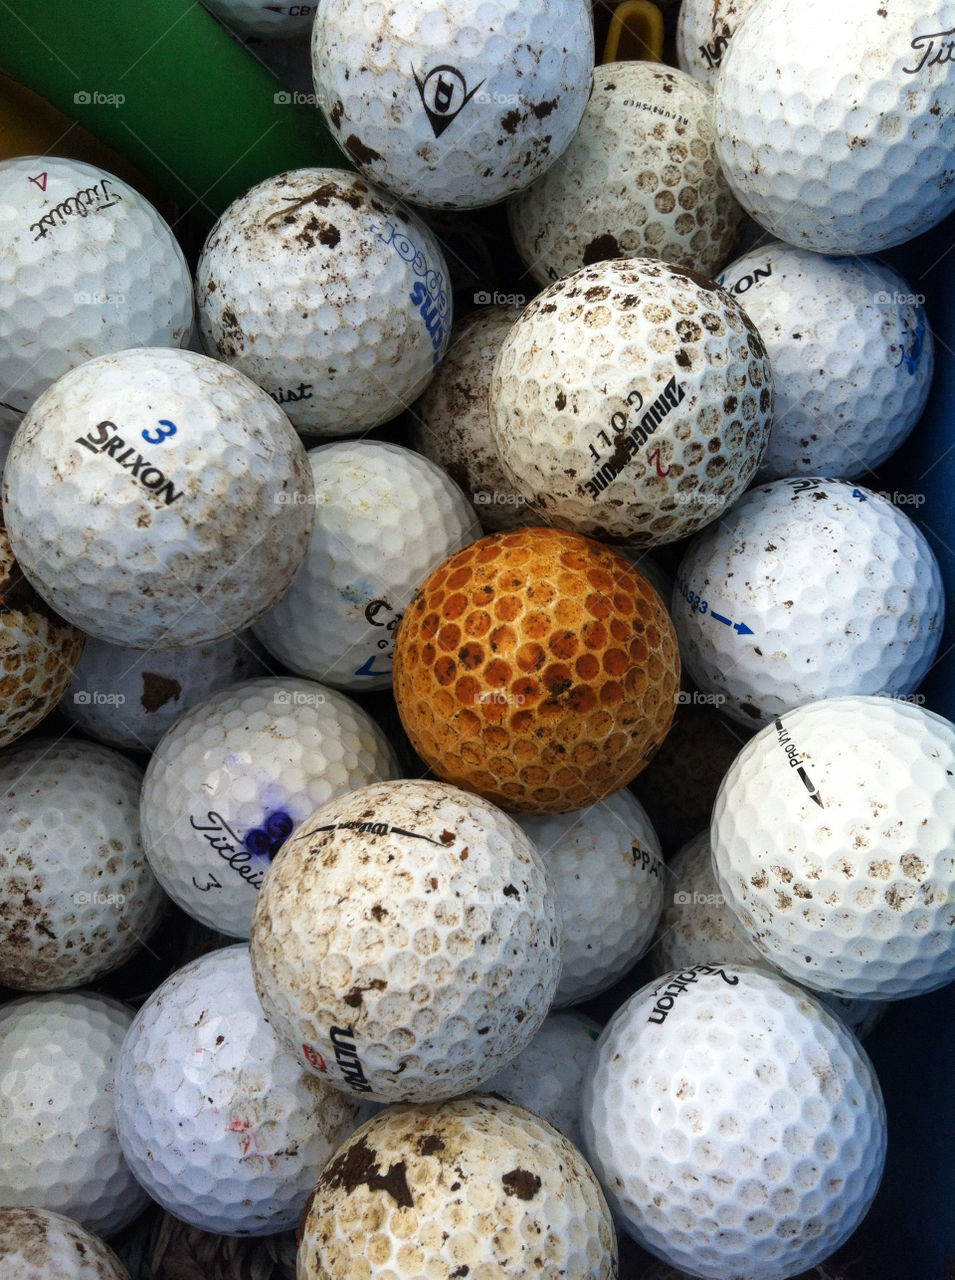  golf ball close up by zeewolf. A day finding lost golf balls
